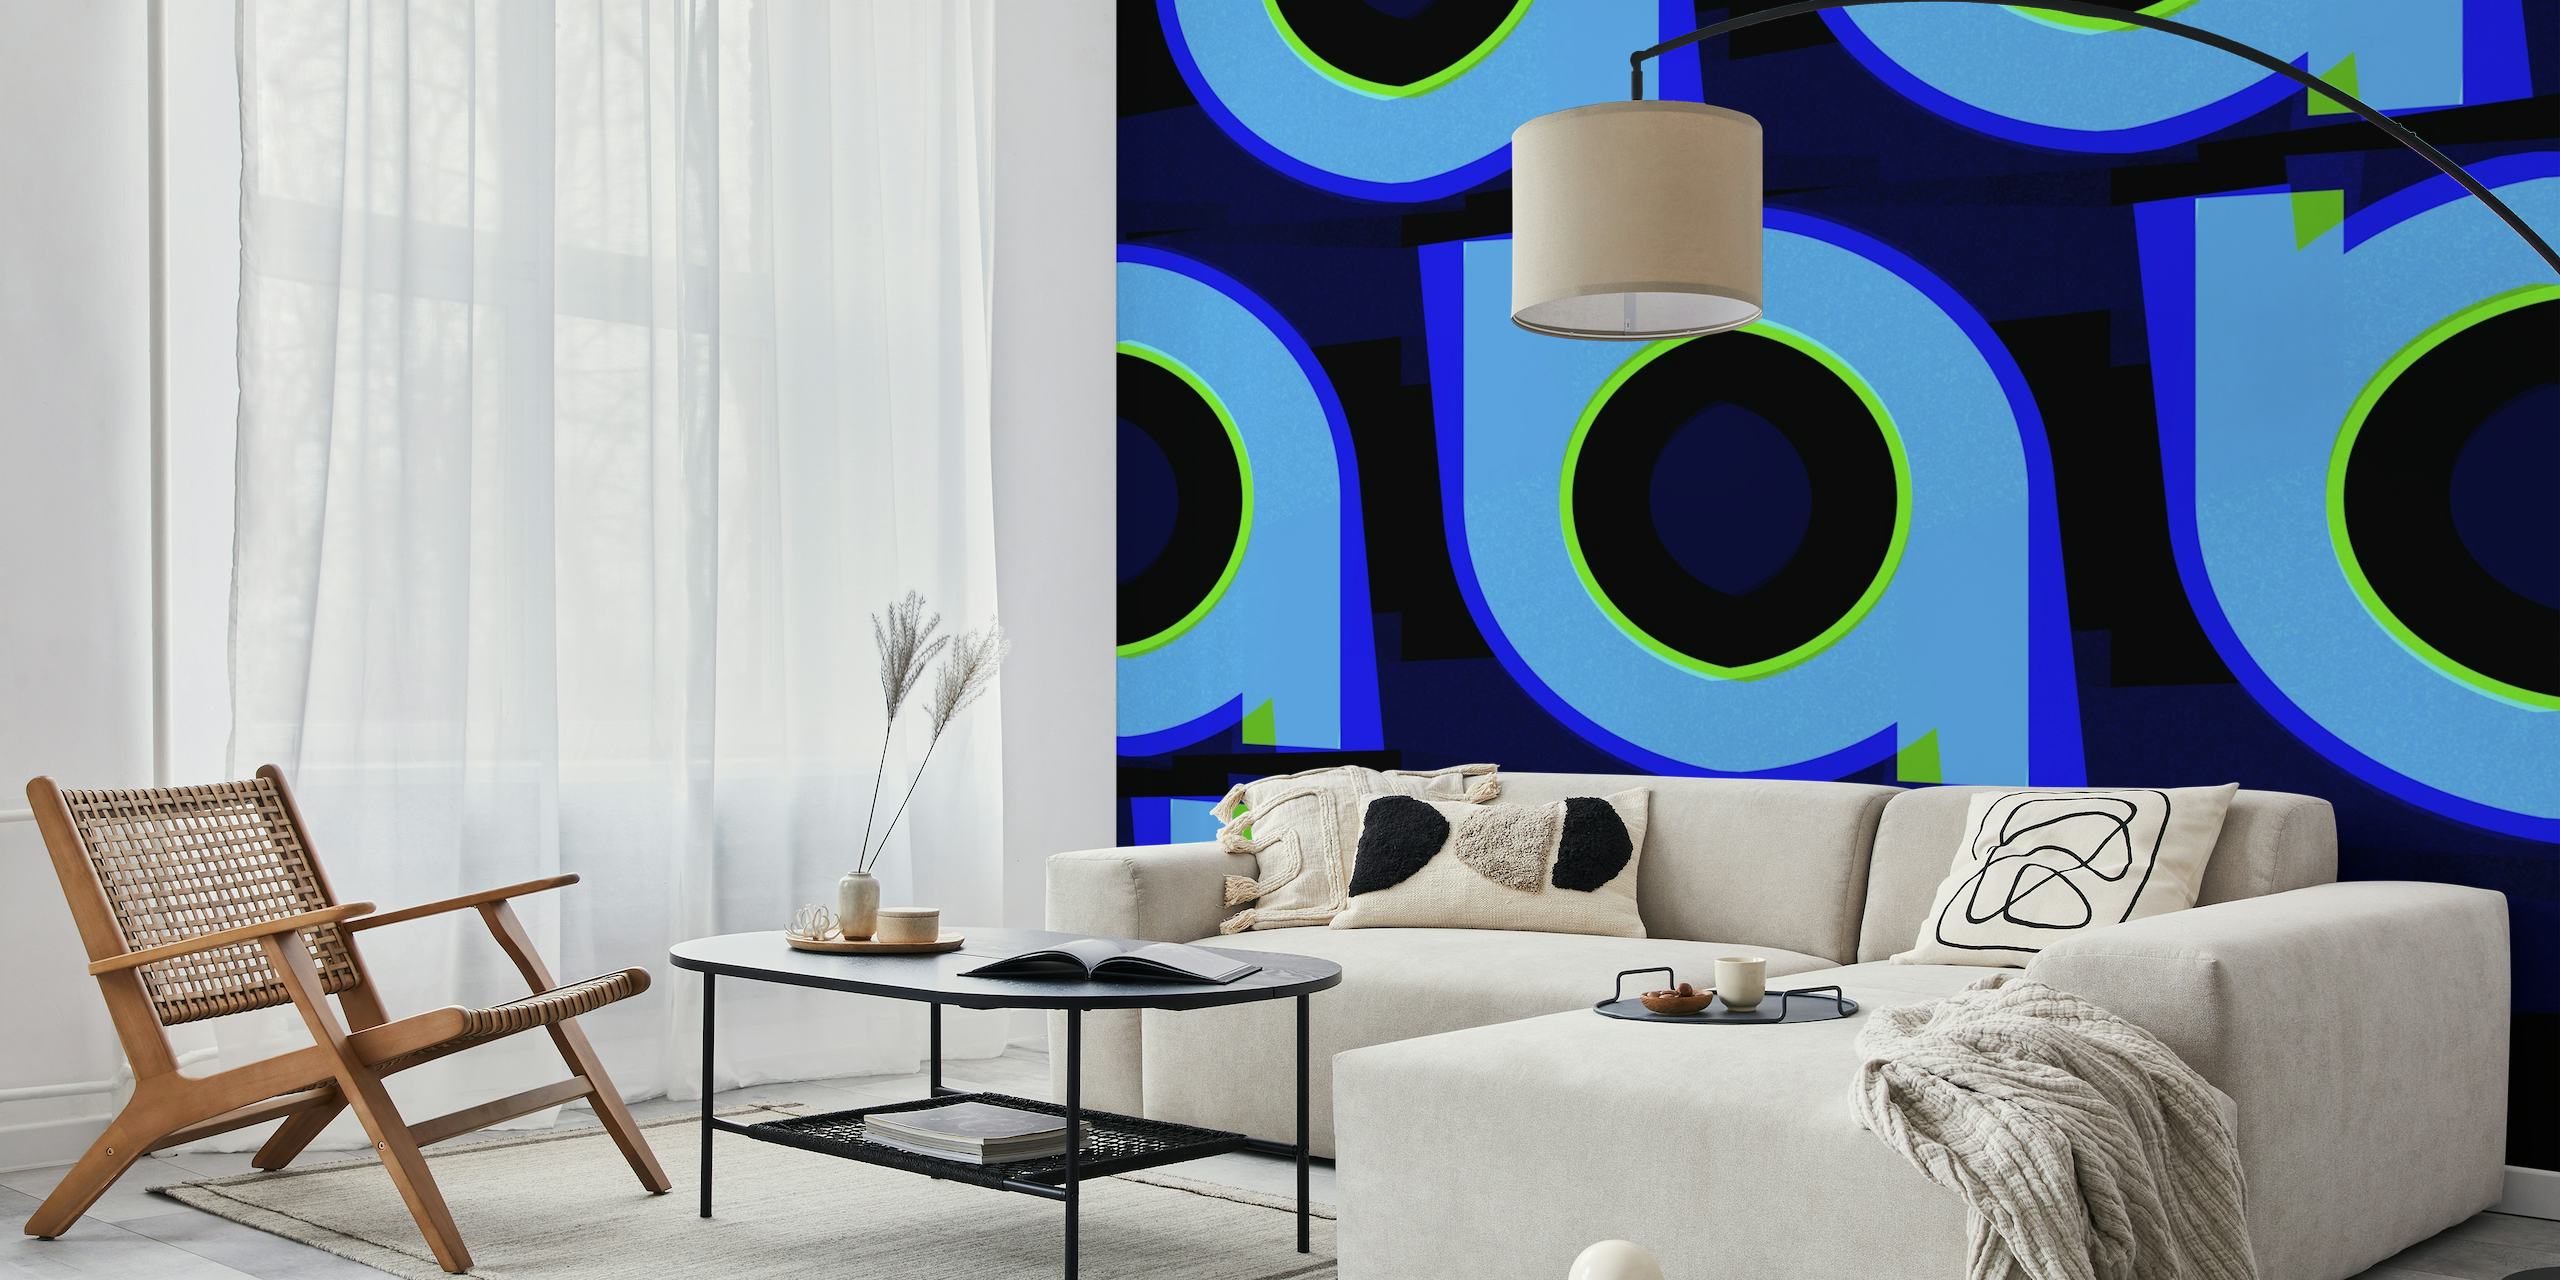 Seventies retro-inspired wall mural with geometric shapes in blue tones